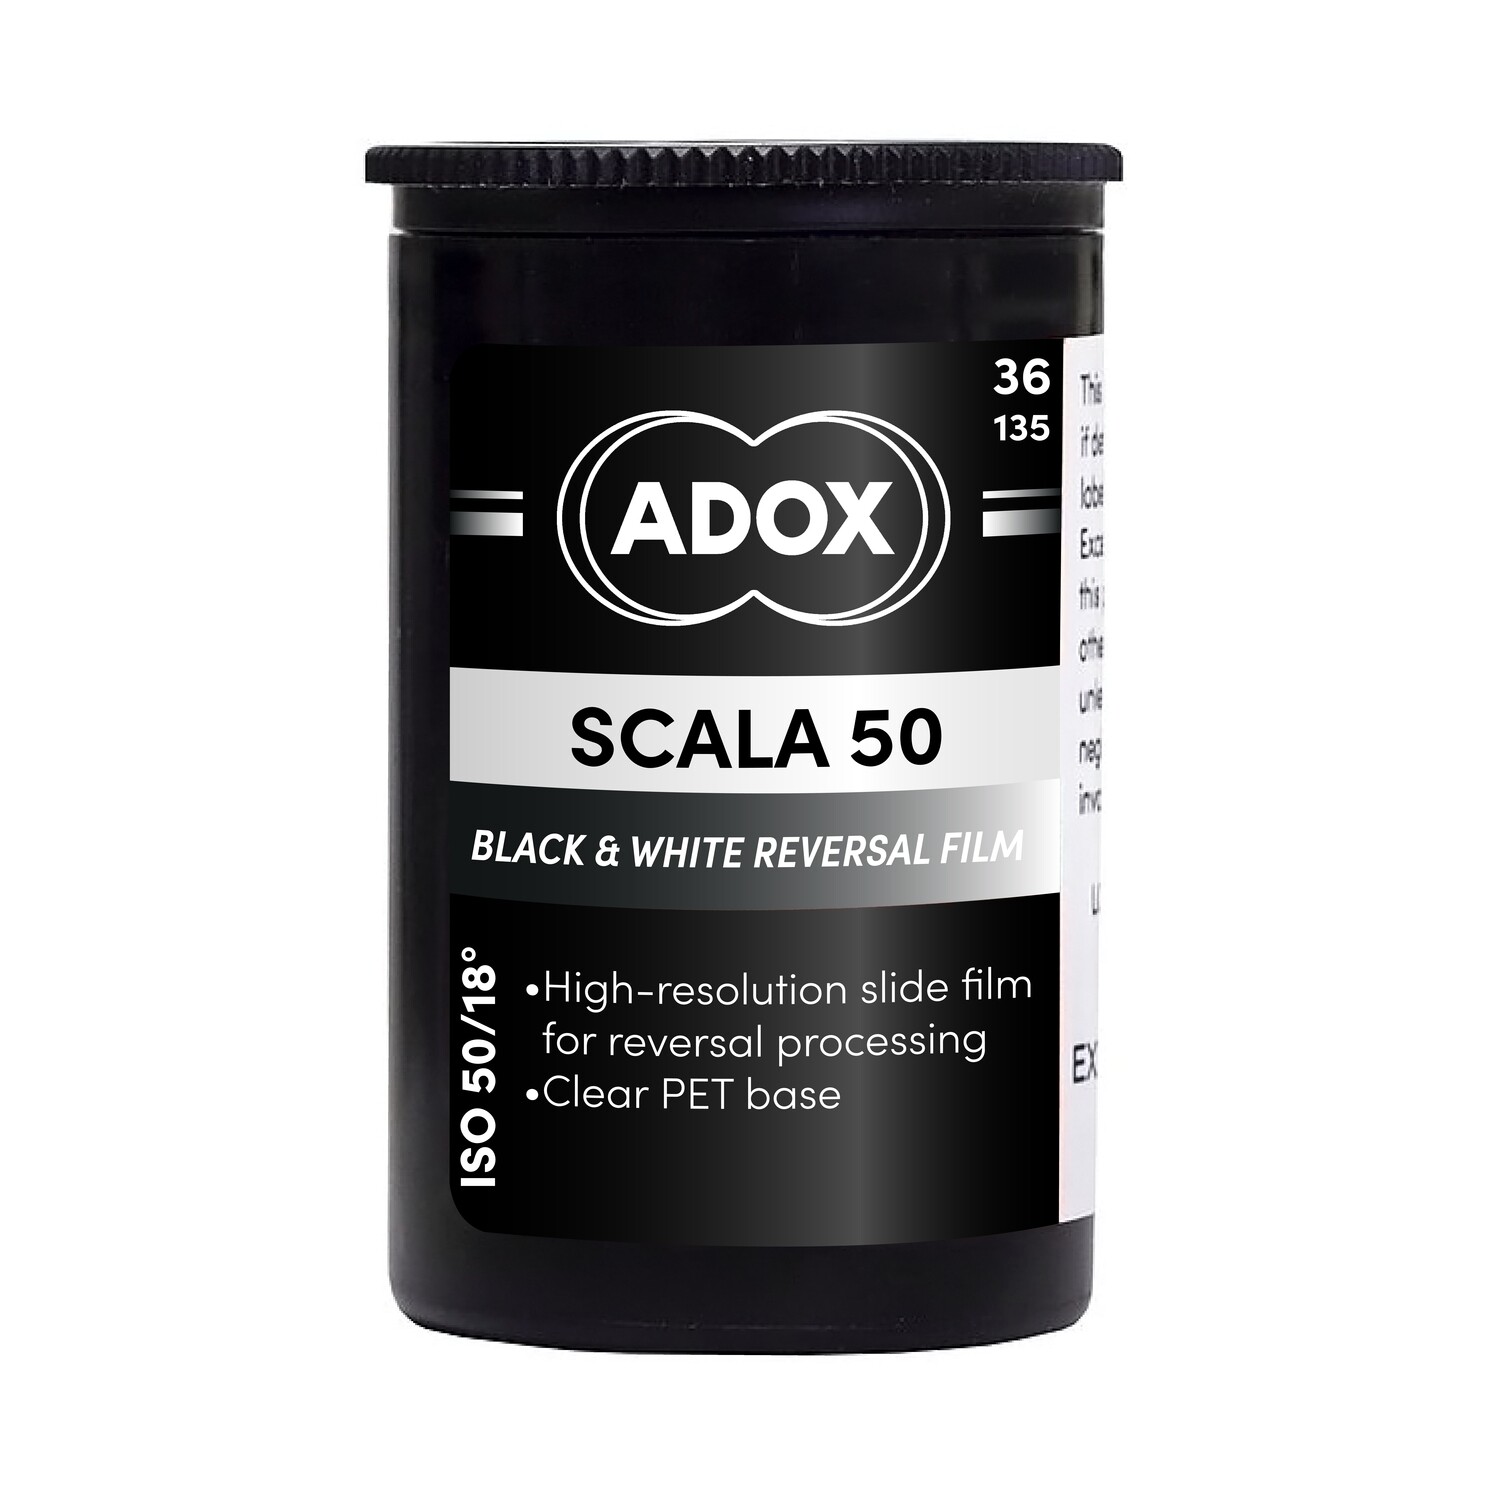 Adox SCALA 50 Black and White Slide Film (35mm Roll Film, 36 Exposures - expired 09/2023